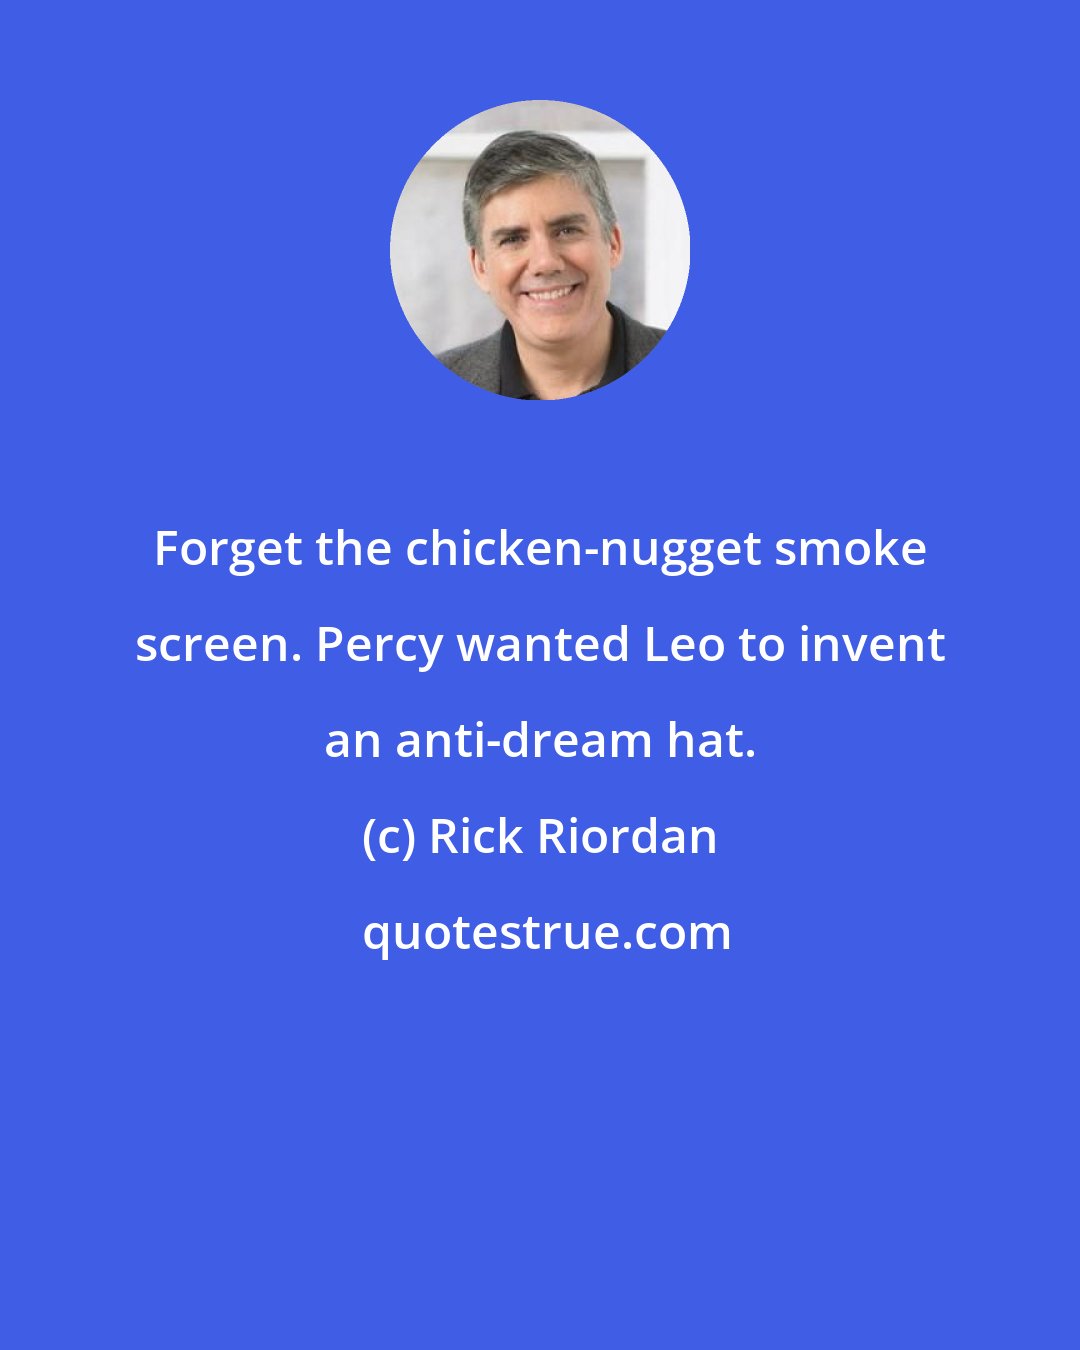 Rick Riordan: Forget the chicken-nugget smoke screen. Percy wanted Leo to invent an anti-dream hat.